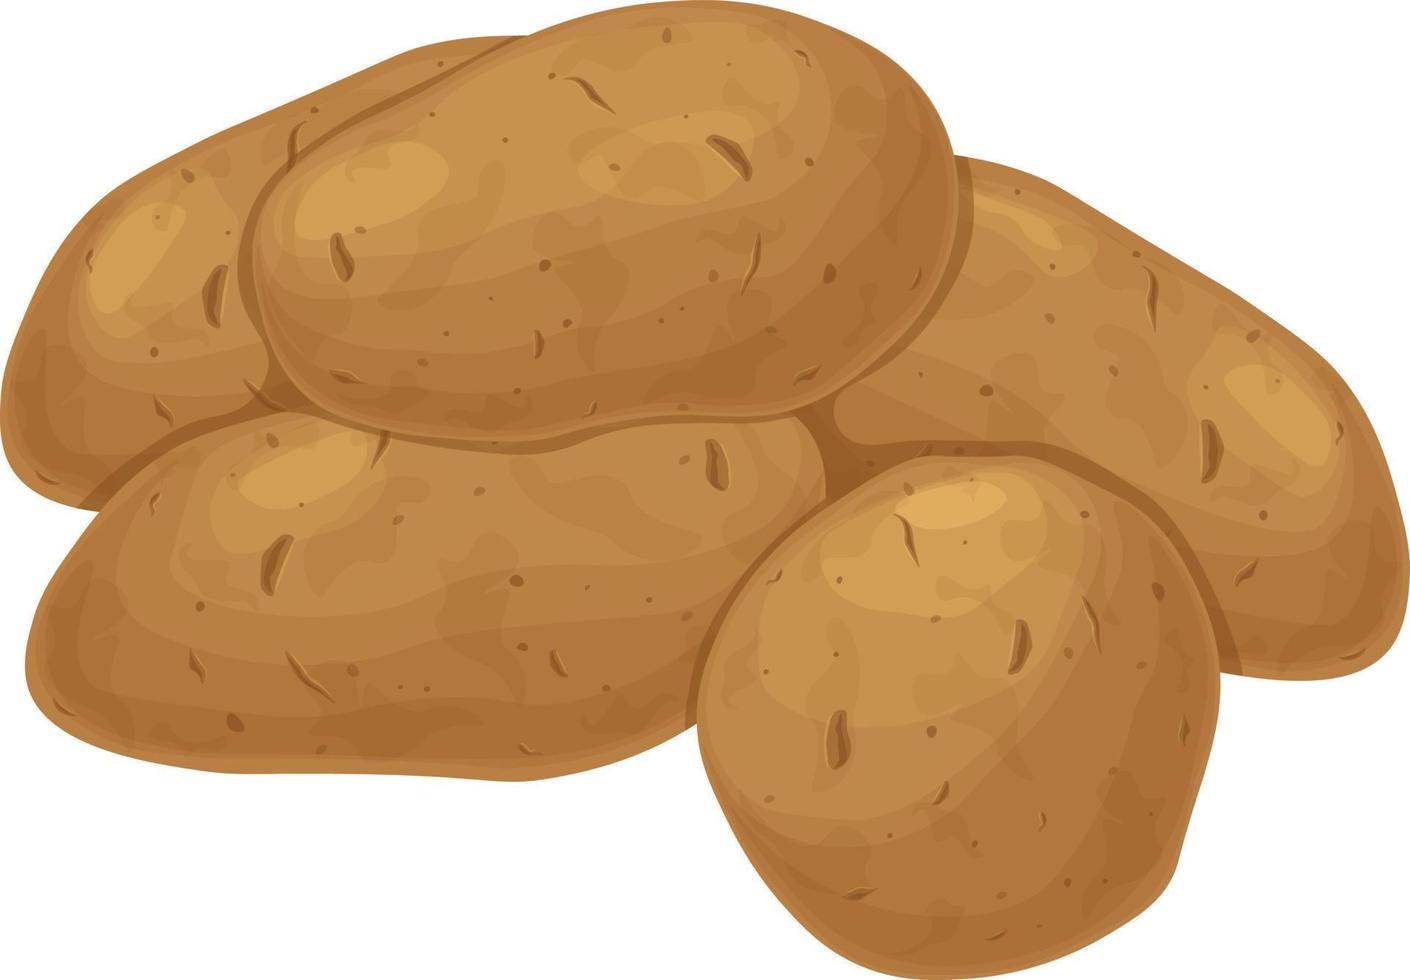 Potato. Potato tubers. A ripe vegetable. Vegetarian product. Sliced potatoes. Vector illustration isolated on a white background